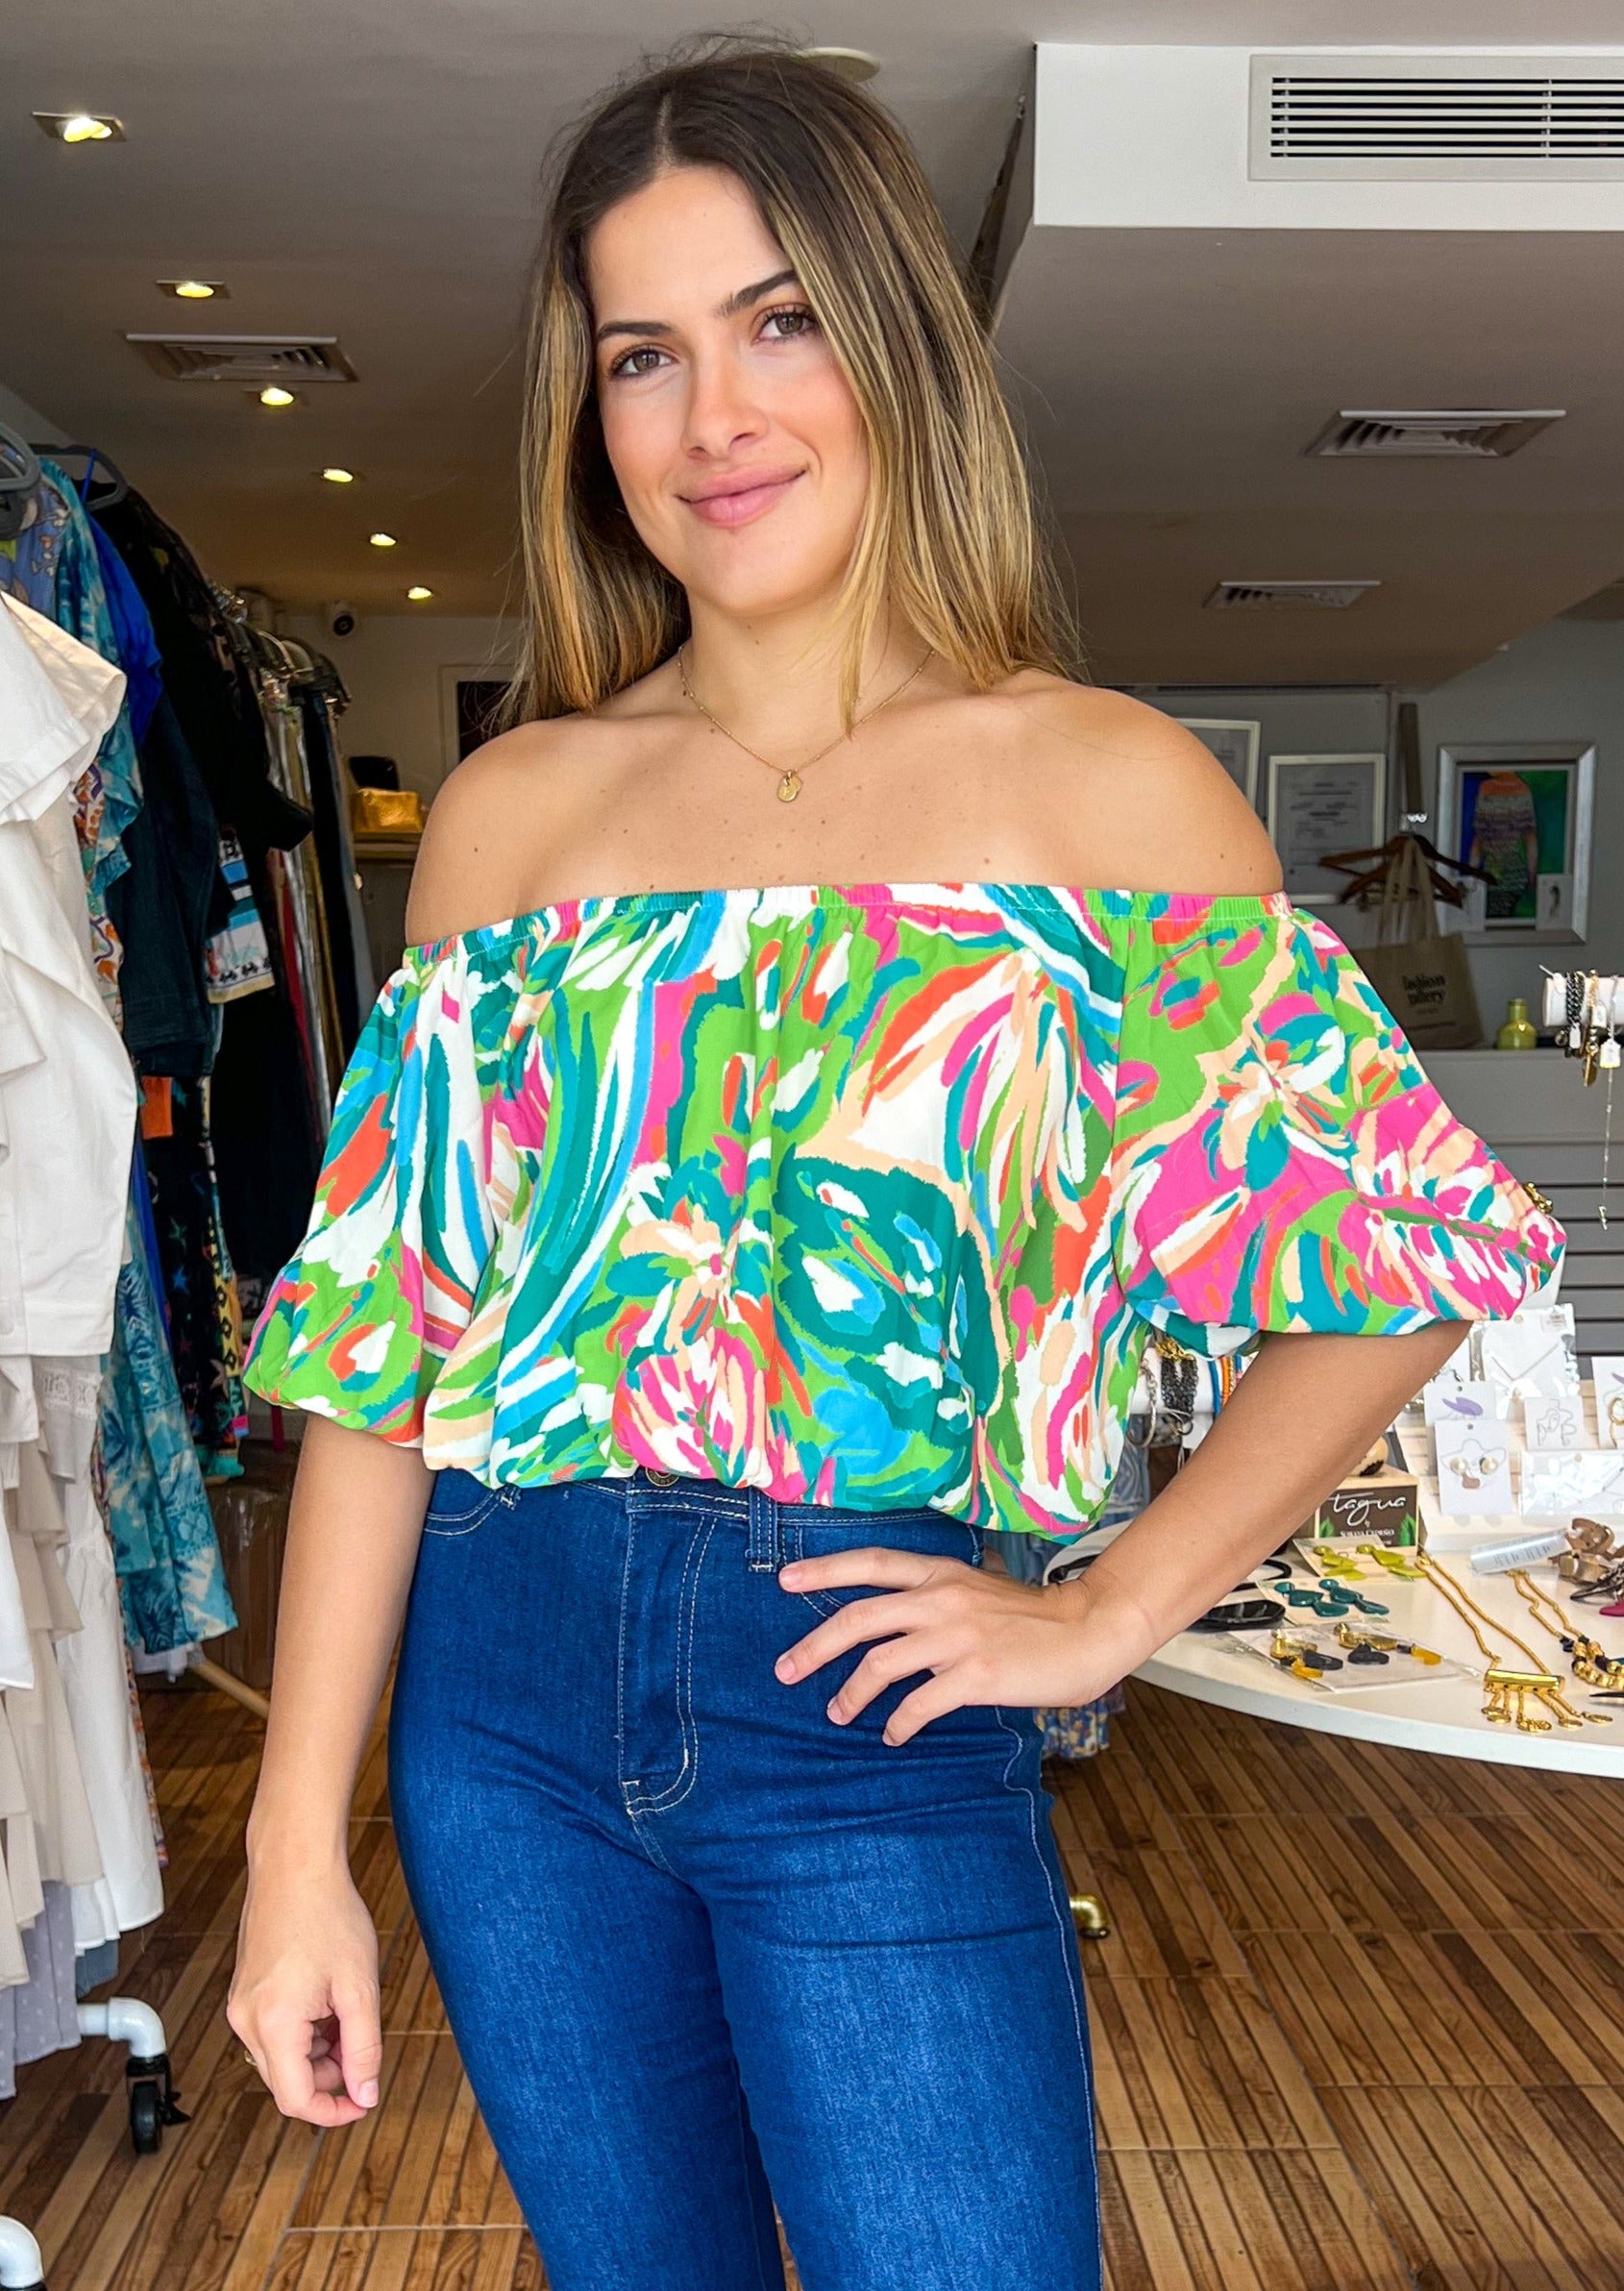 Green and pink printed woven top featuring on/off shoulder neckline with elasticized waist.